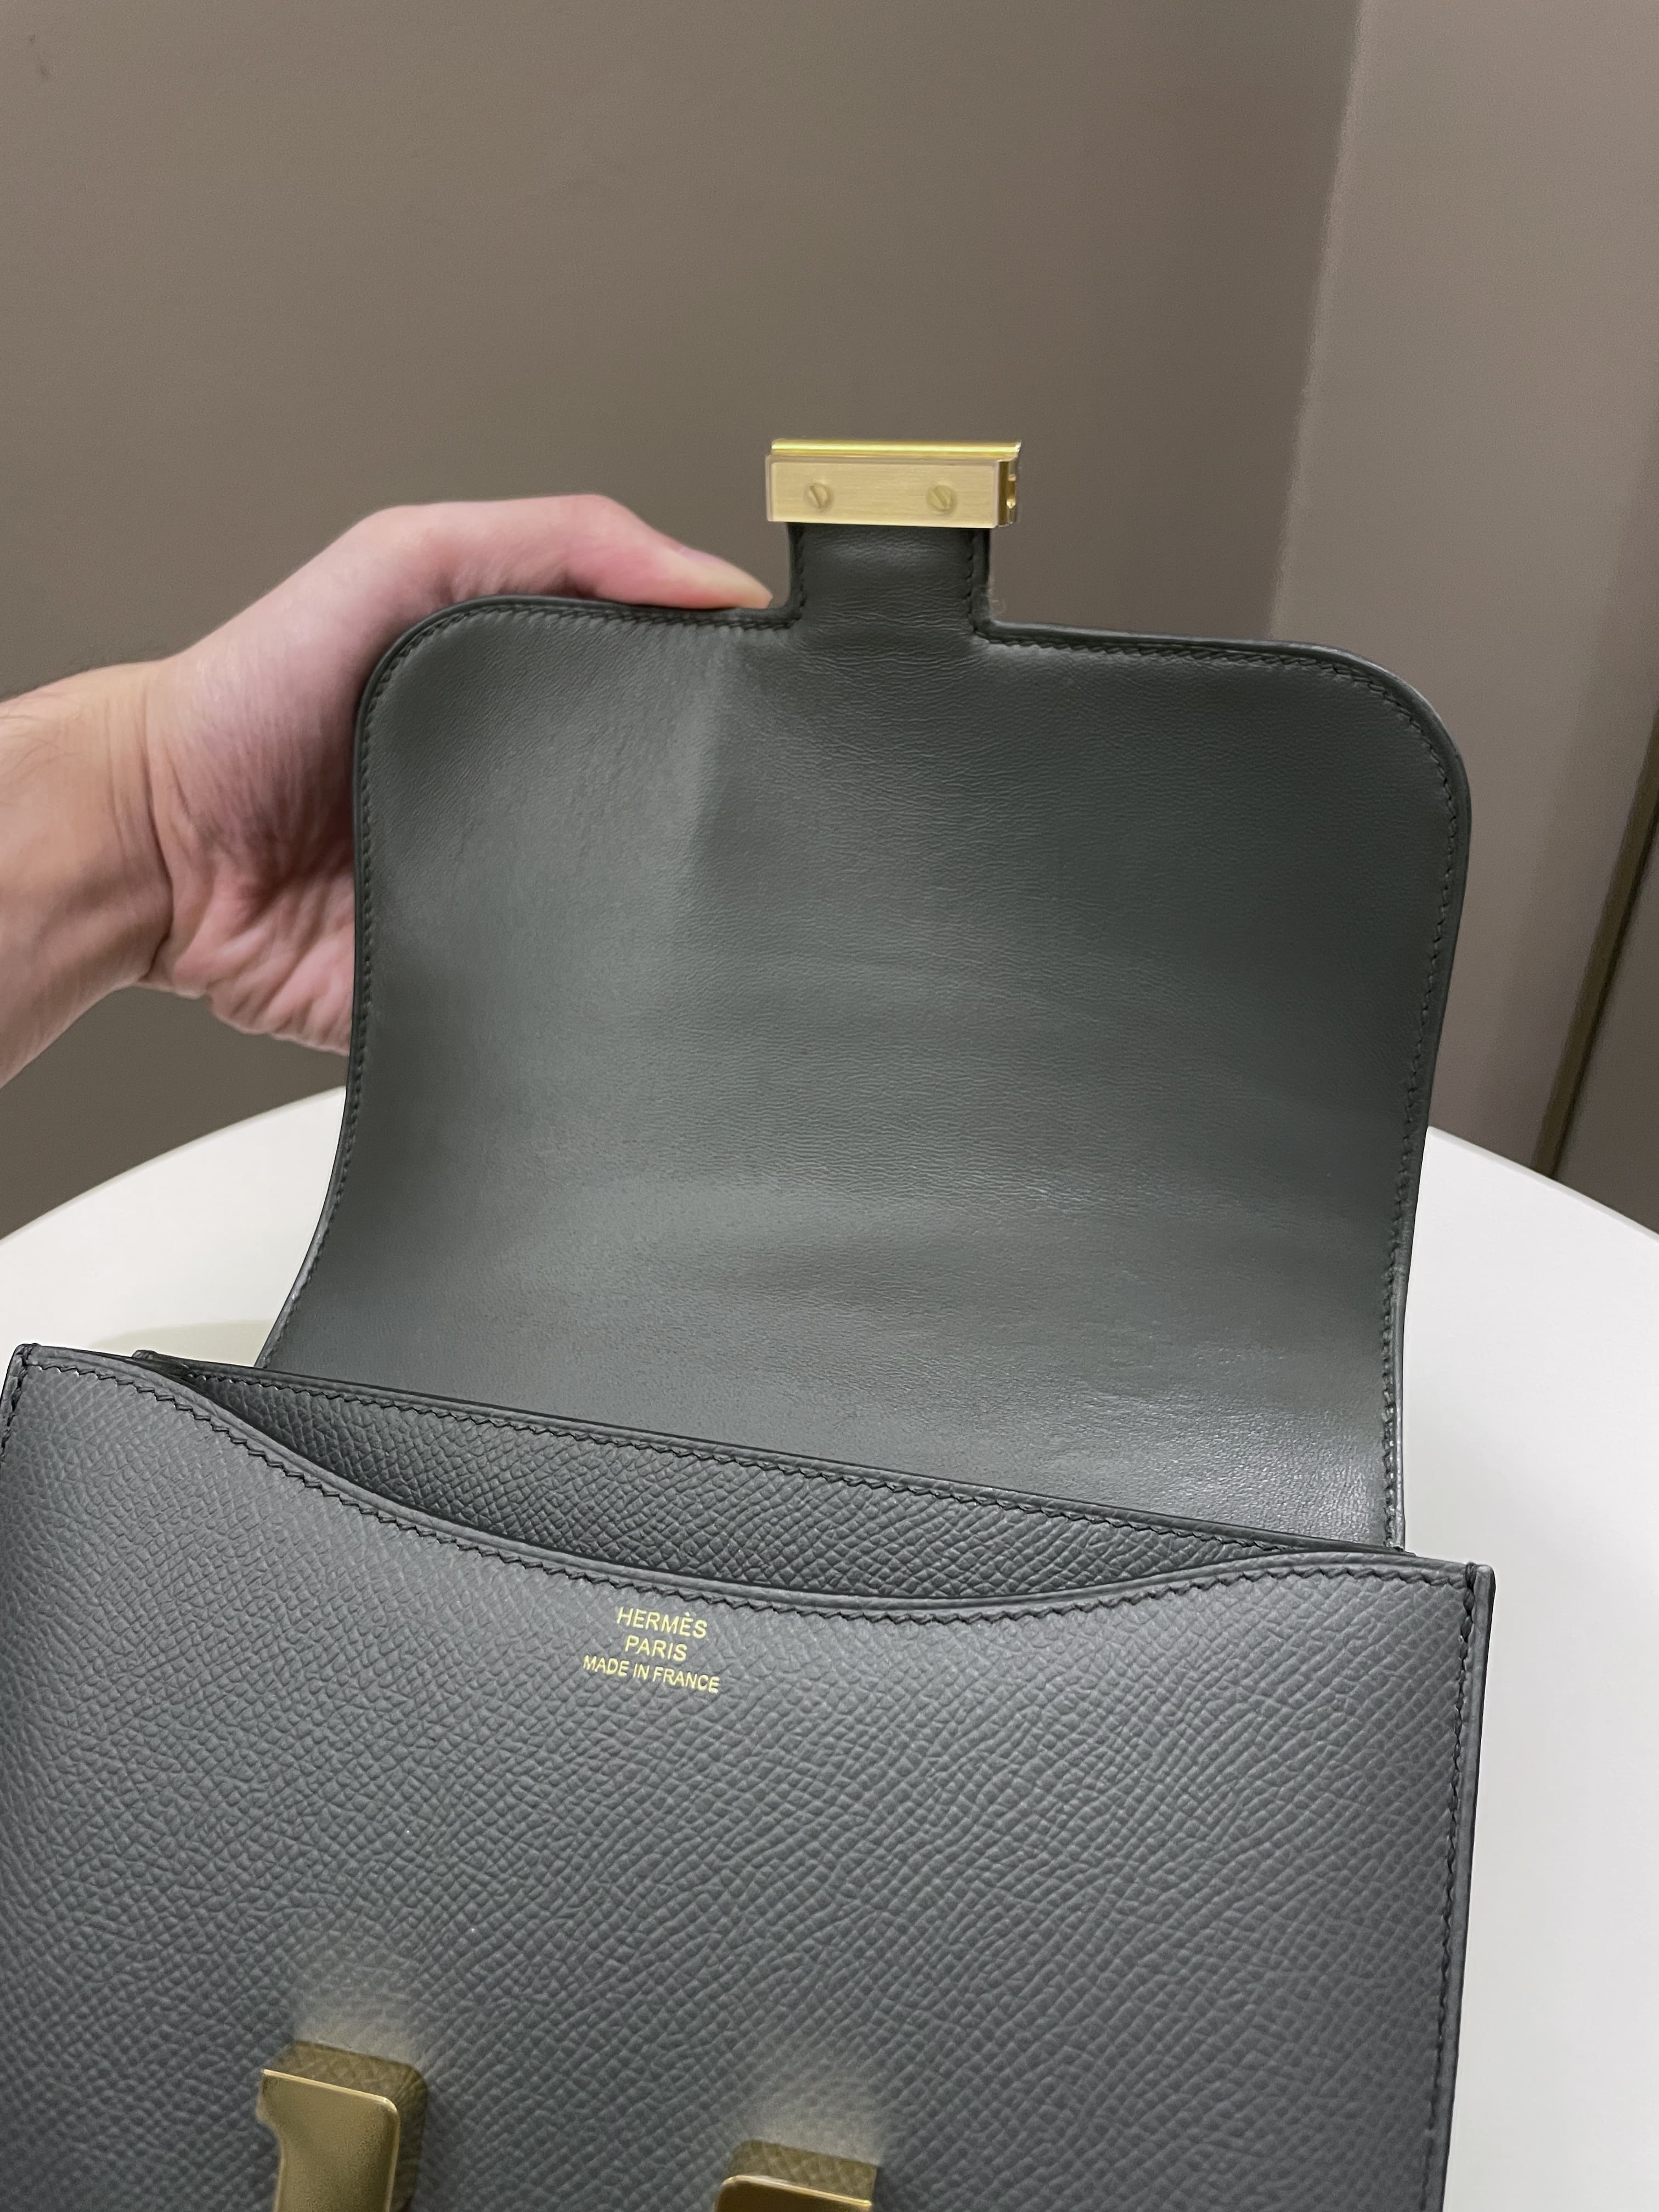 LoVey Goody - Brand New Hermes Constance 18 Vert Amande Epsom in Gold  Hardware Comes full set with receipt WhatsApp us at +60123288255 for more  info #hermesconstance18 #constance18 #constancemini #constance18epsom  #constance18epsomghw #hermesvertamande